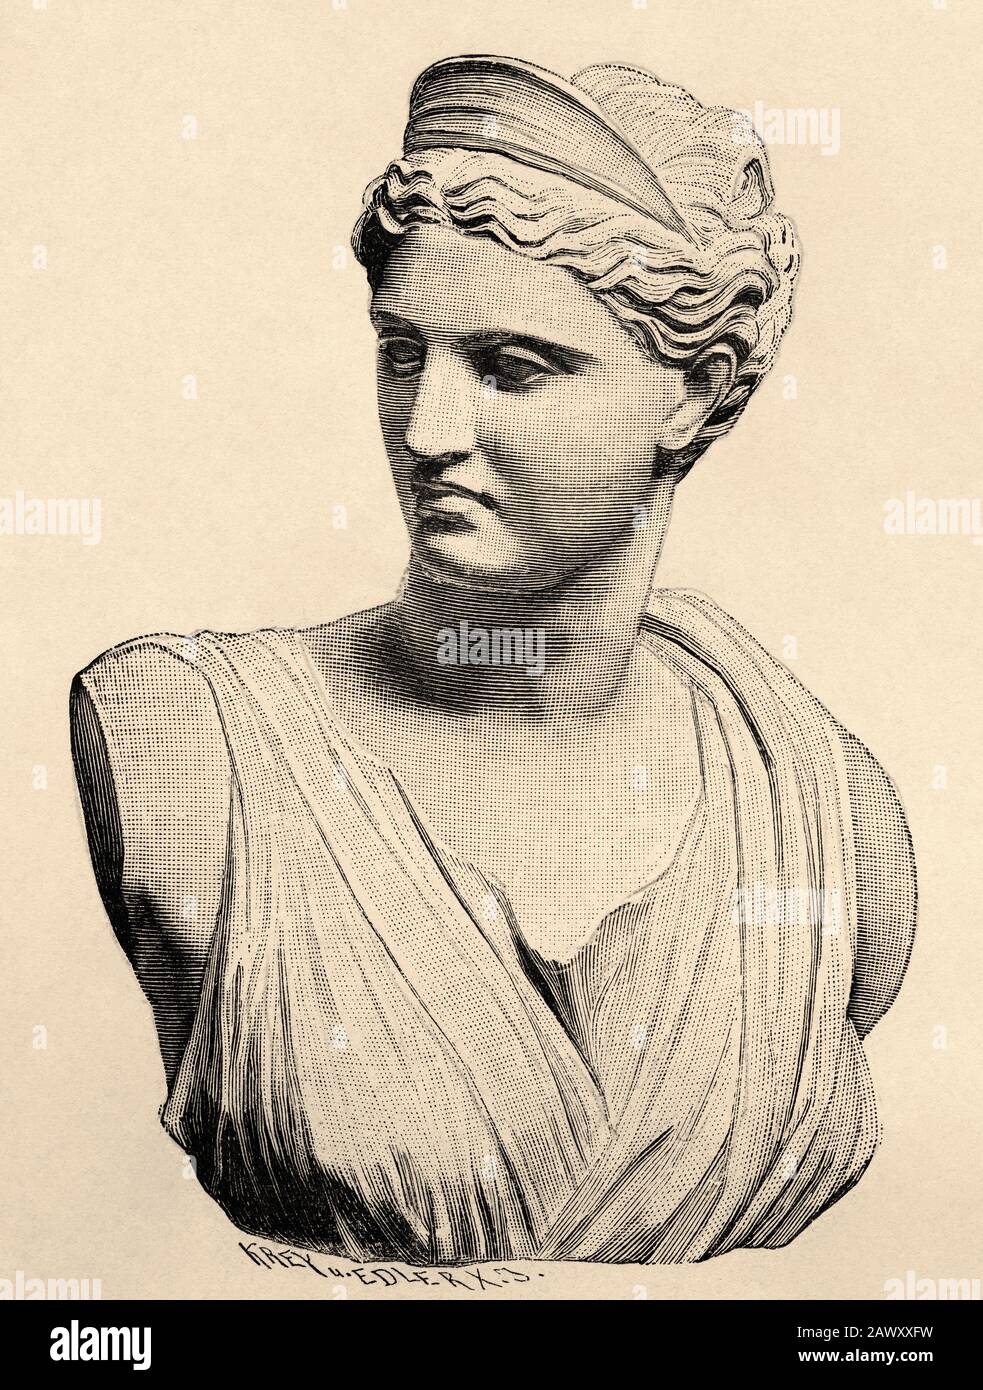 Artemis or Diana of Versailles, the goddess of the hunt. Greece ancient history. Old engraving illustration from the book Universal history by Oscar J Stock Photo